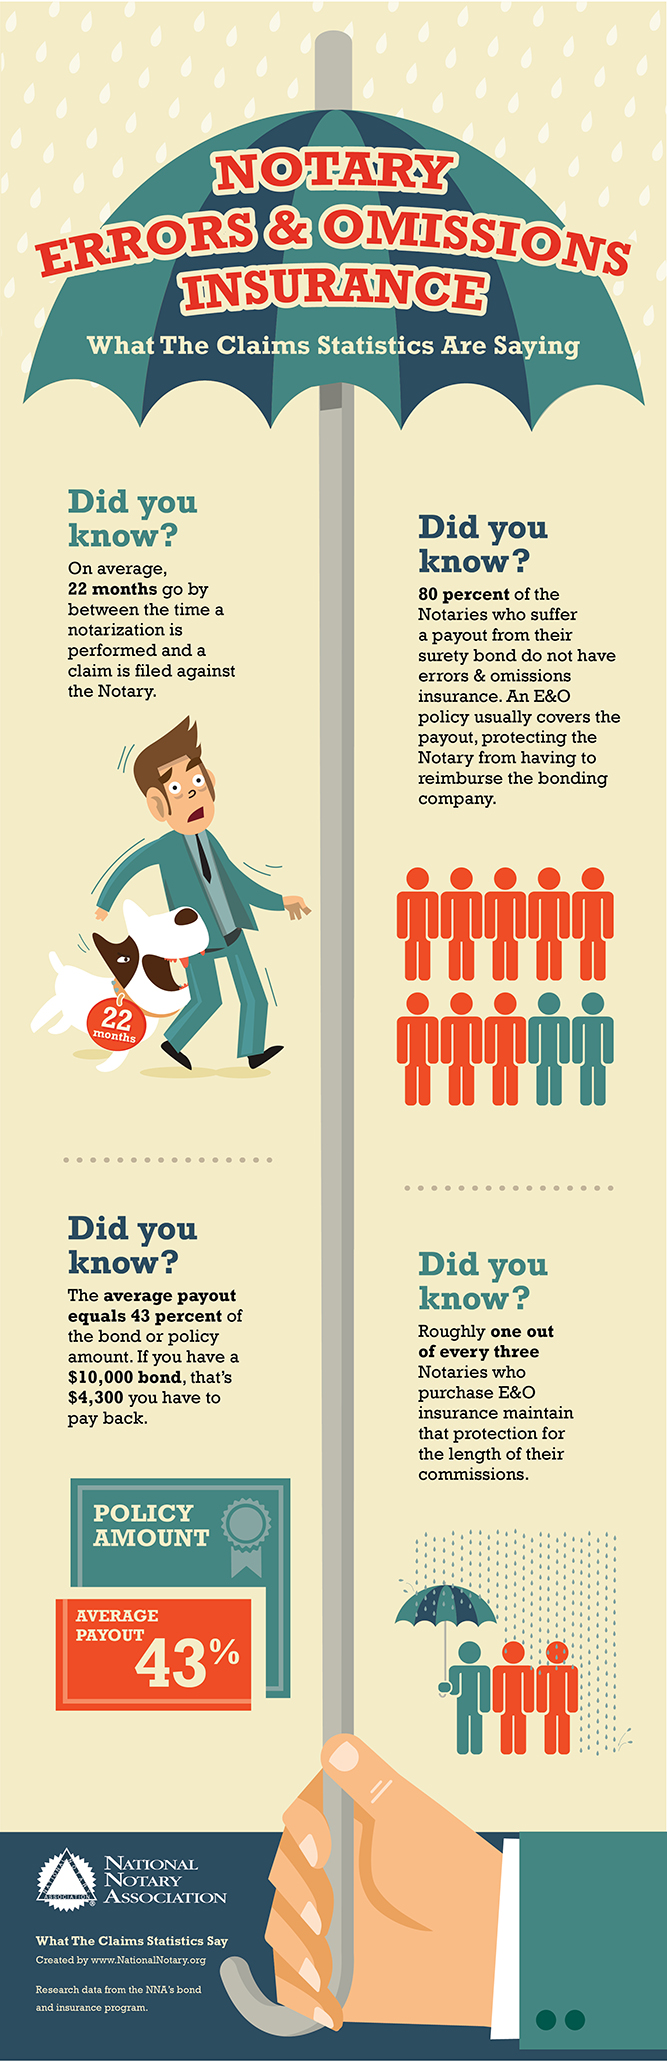 Notary Errors and Omissions Insurance Infographic